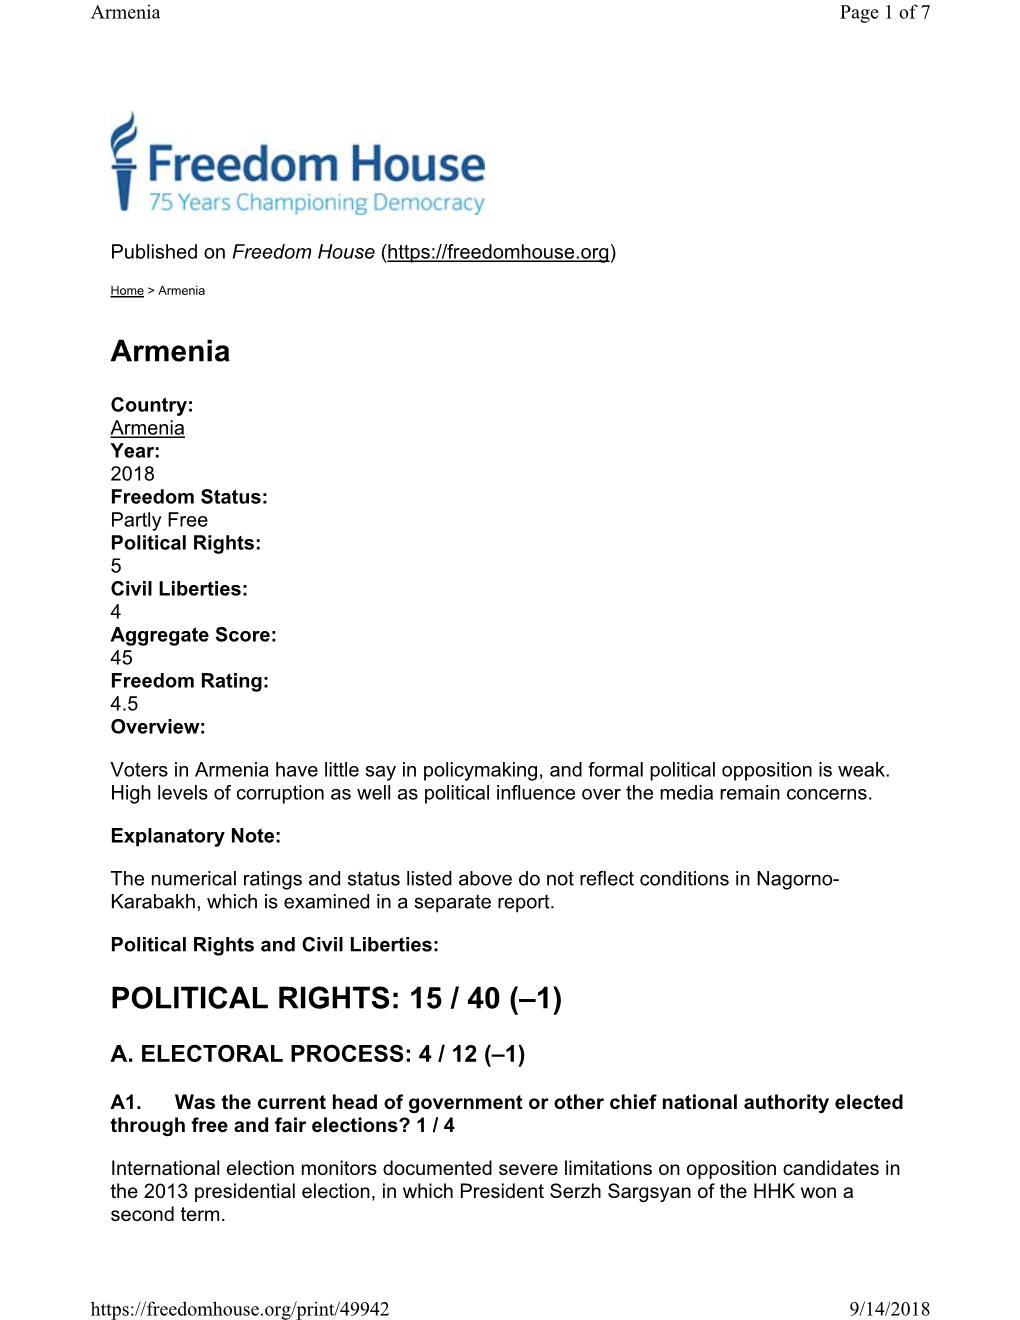 Civil Liberties: 4 Aggregate Score: 45 Freedom Rating: 4.5 Overview